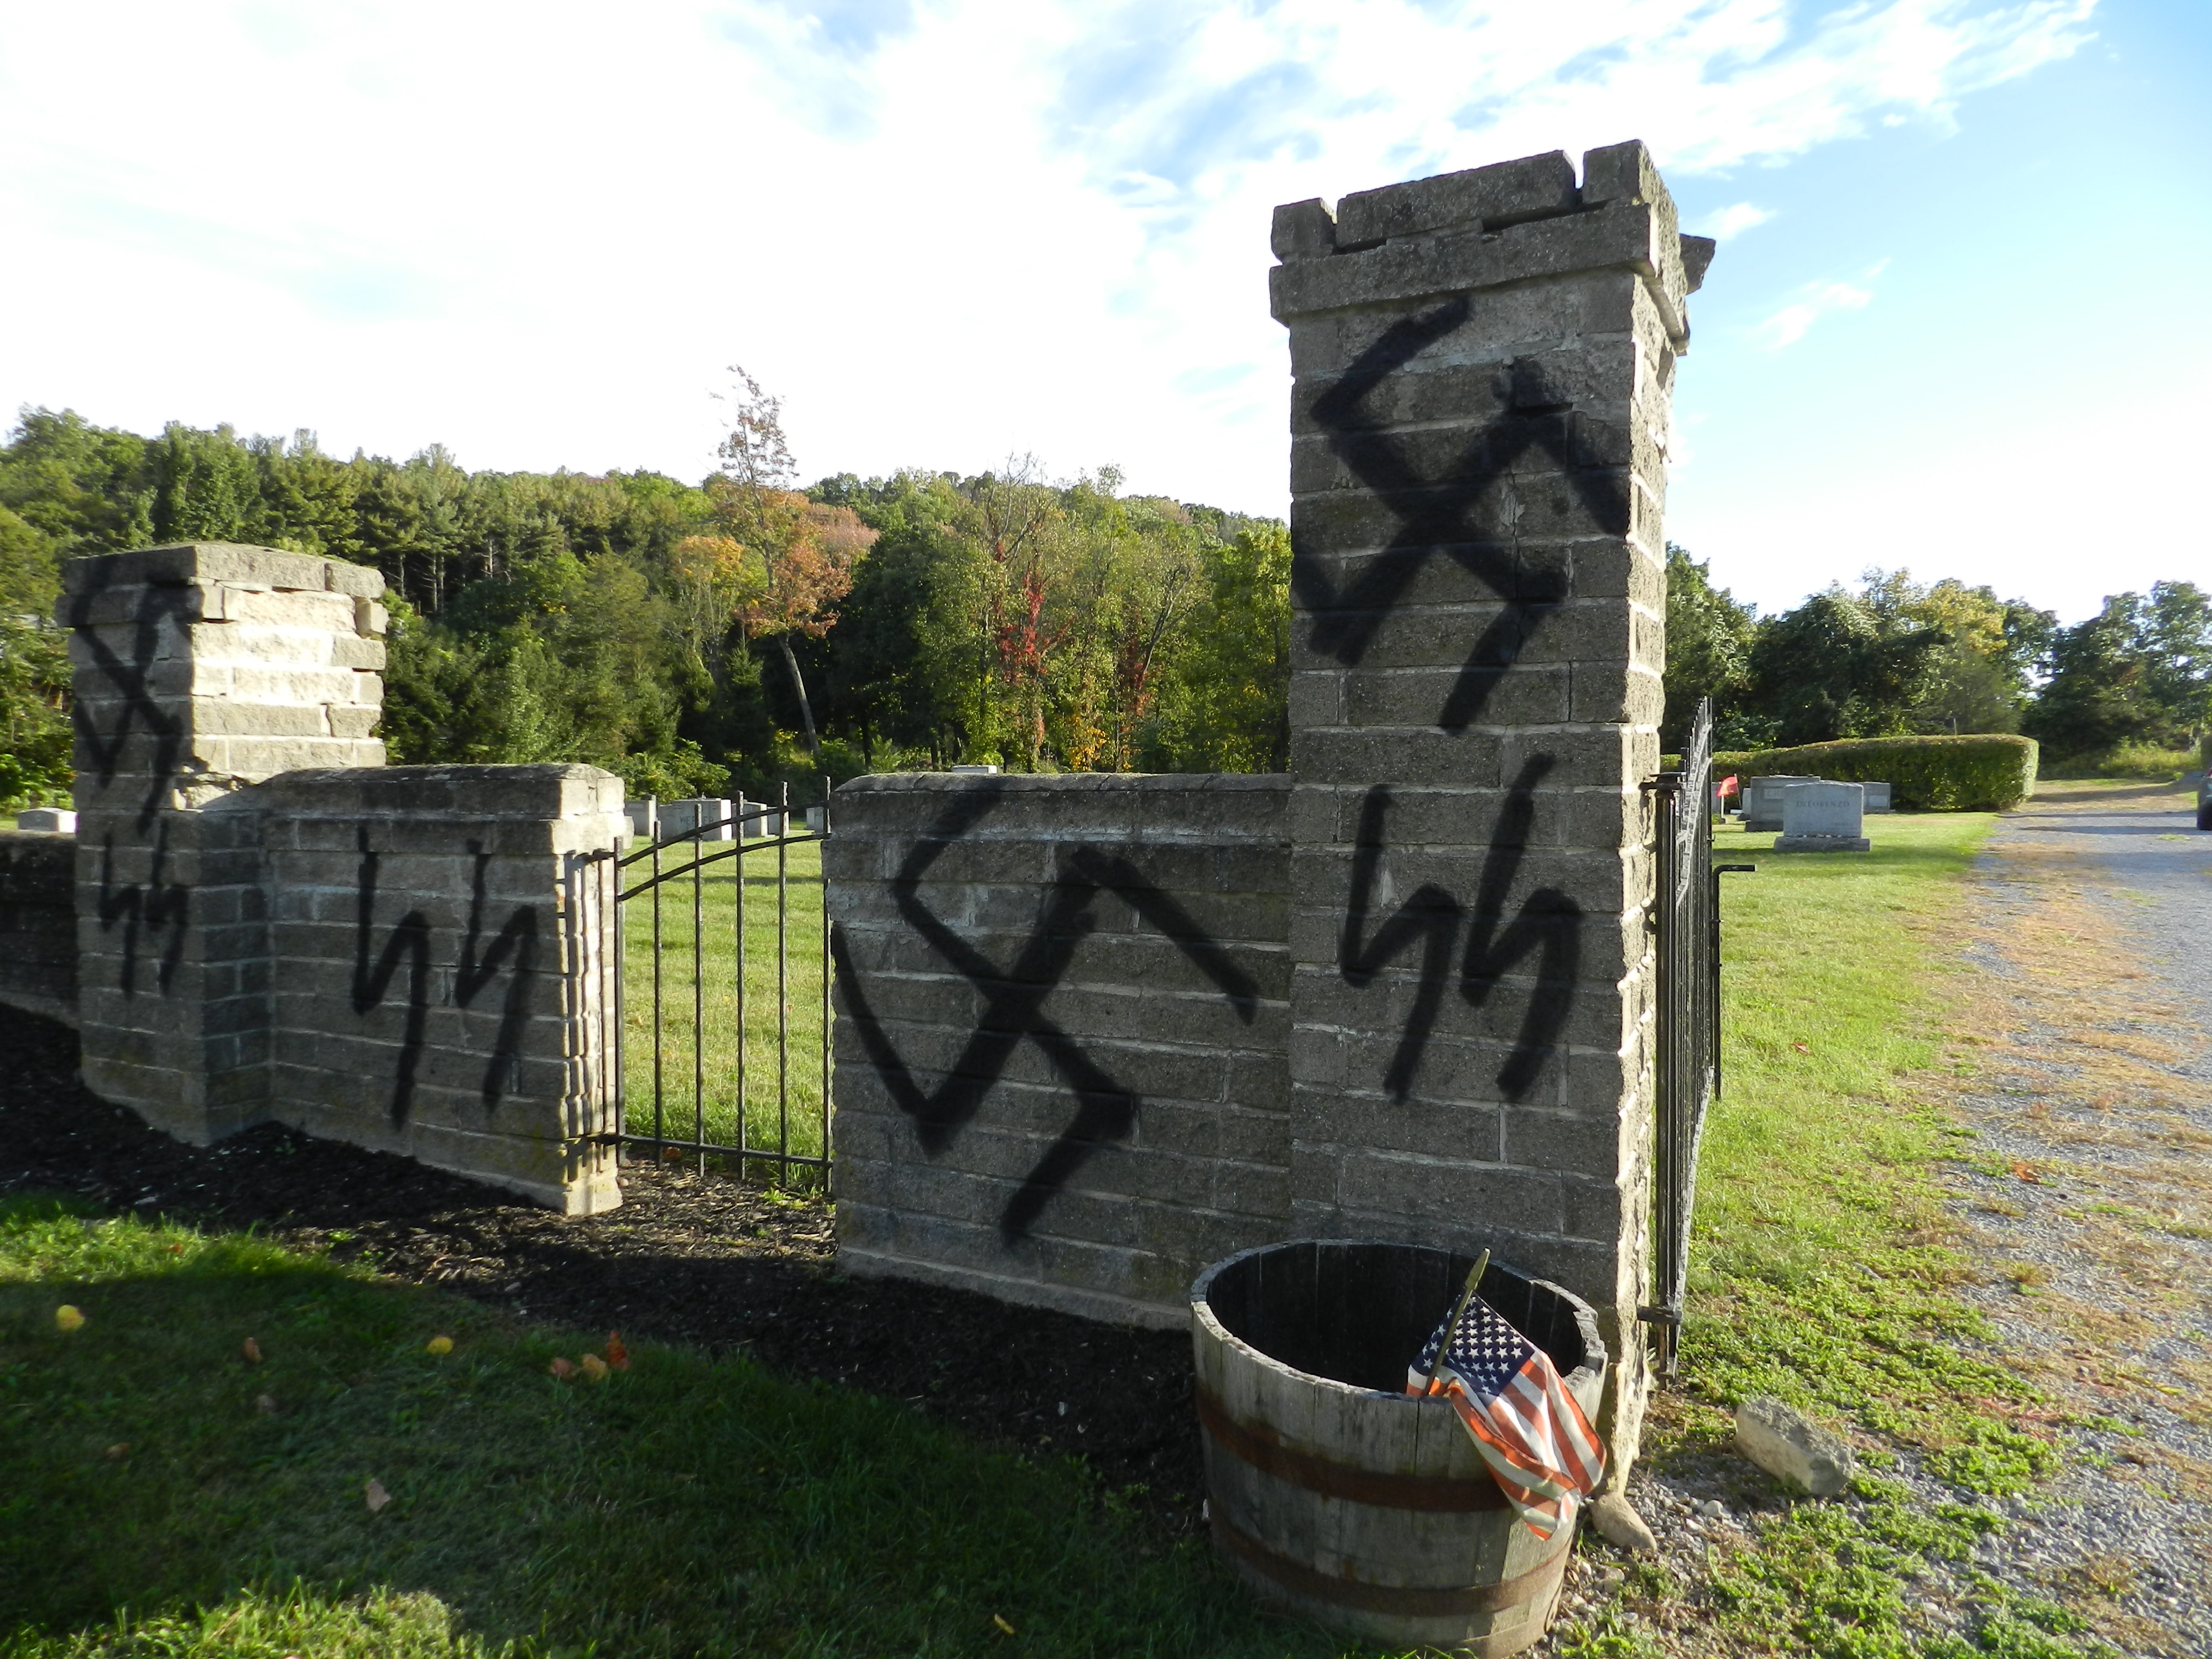 Temple Beth Shalom's cemetery in the Town of Warwick was found desecrated with anti-Semitic graffiti on Sunday morning. The vandalism included swastikas, the letters SS and the words Heil Hitler. Oct. 9, 2016. GITTEL EVANGELIST/TIMES HERALD-RECORD